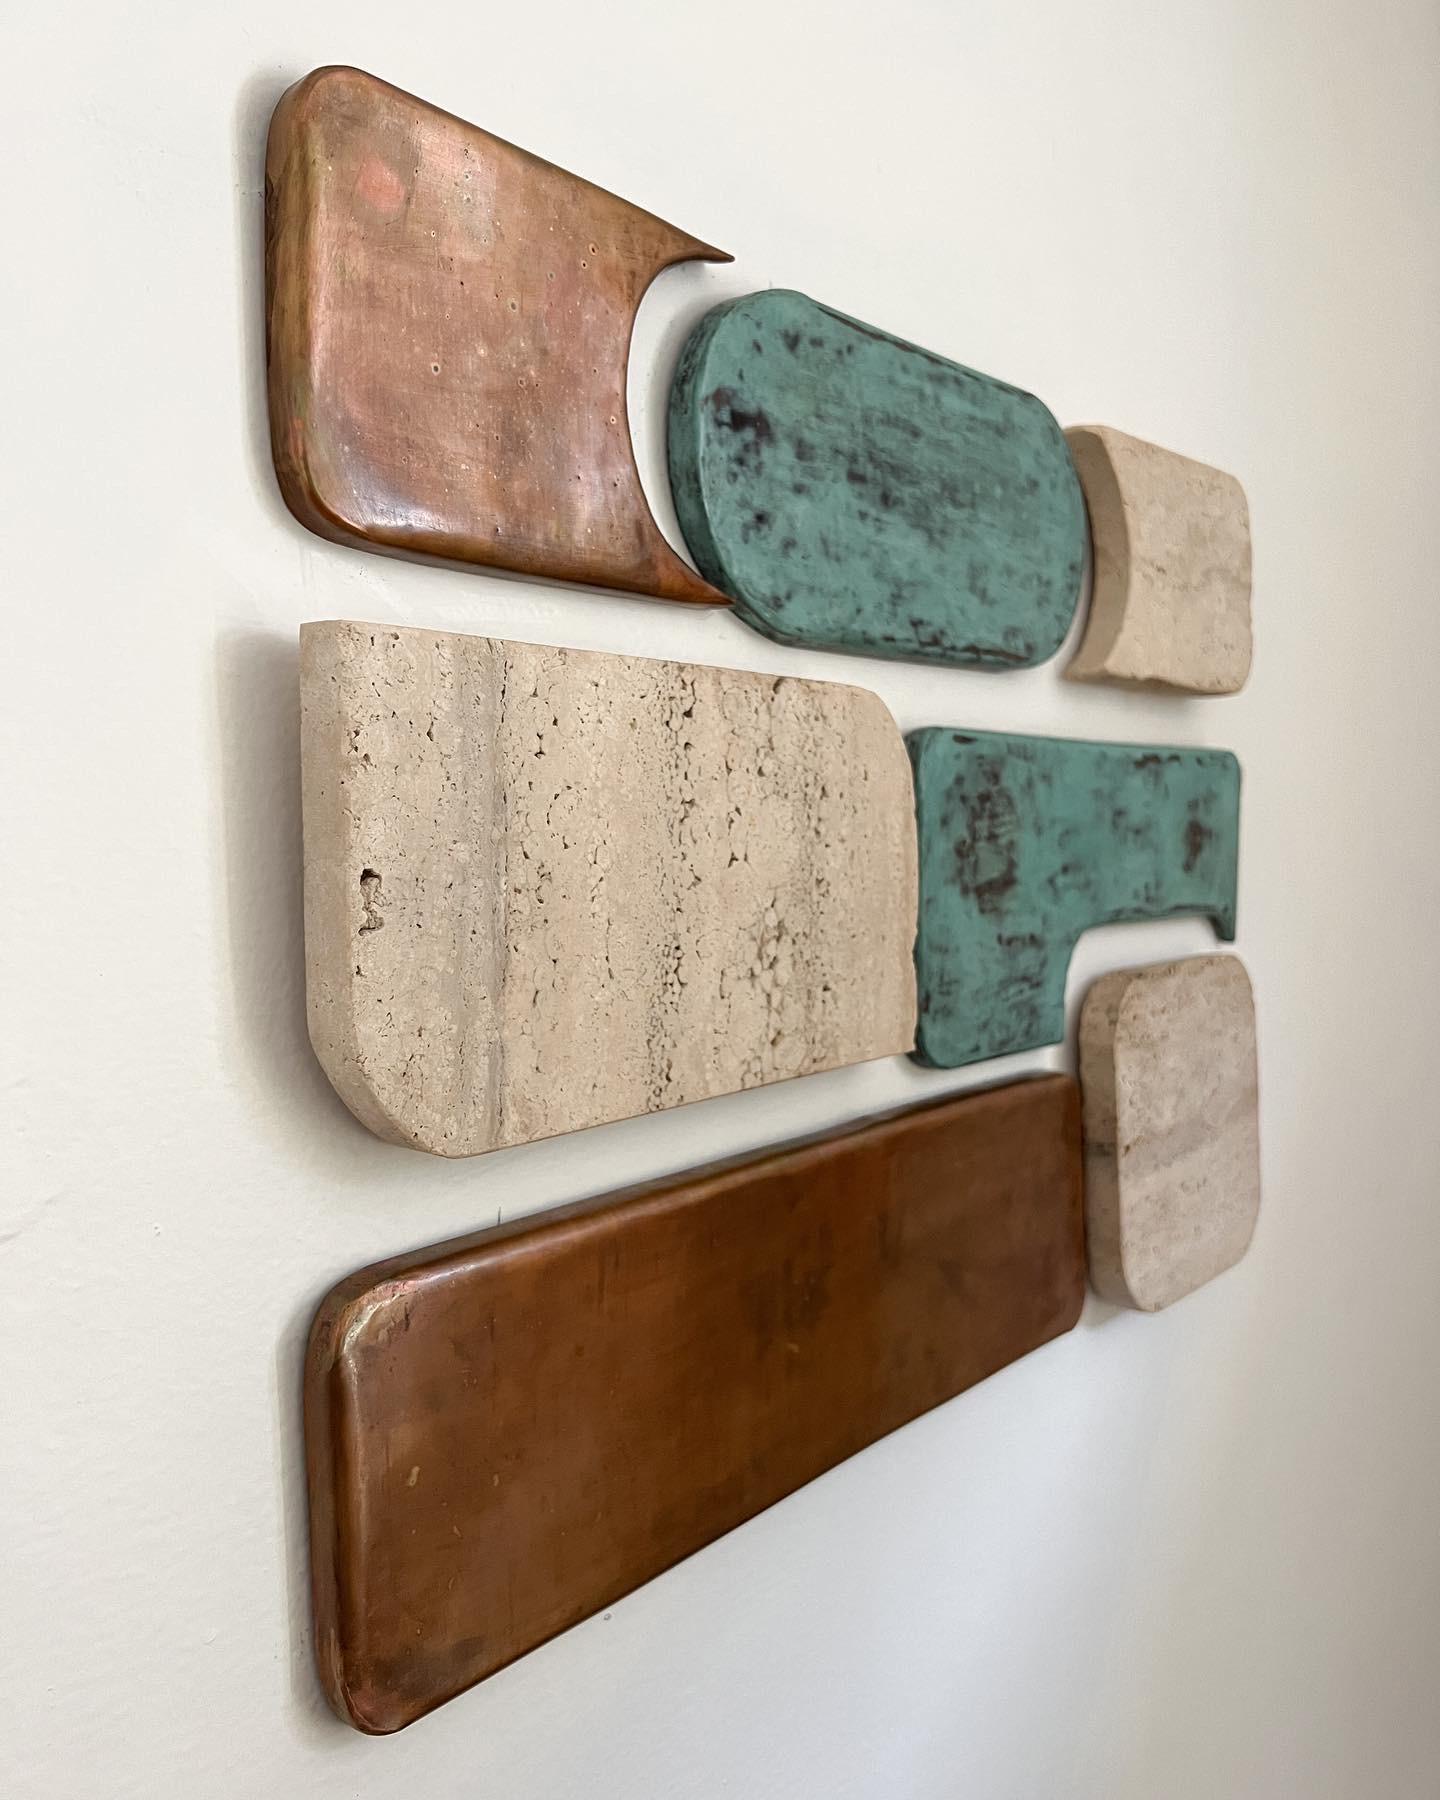 Vides is a wall sculpture, it is the representation of fragments of a poem that could not be delivered.
Handcrafted in Michoacán, Mexico, the manufacture of this collection is through traditional techniques of the region and the contemporary